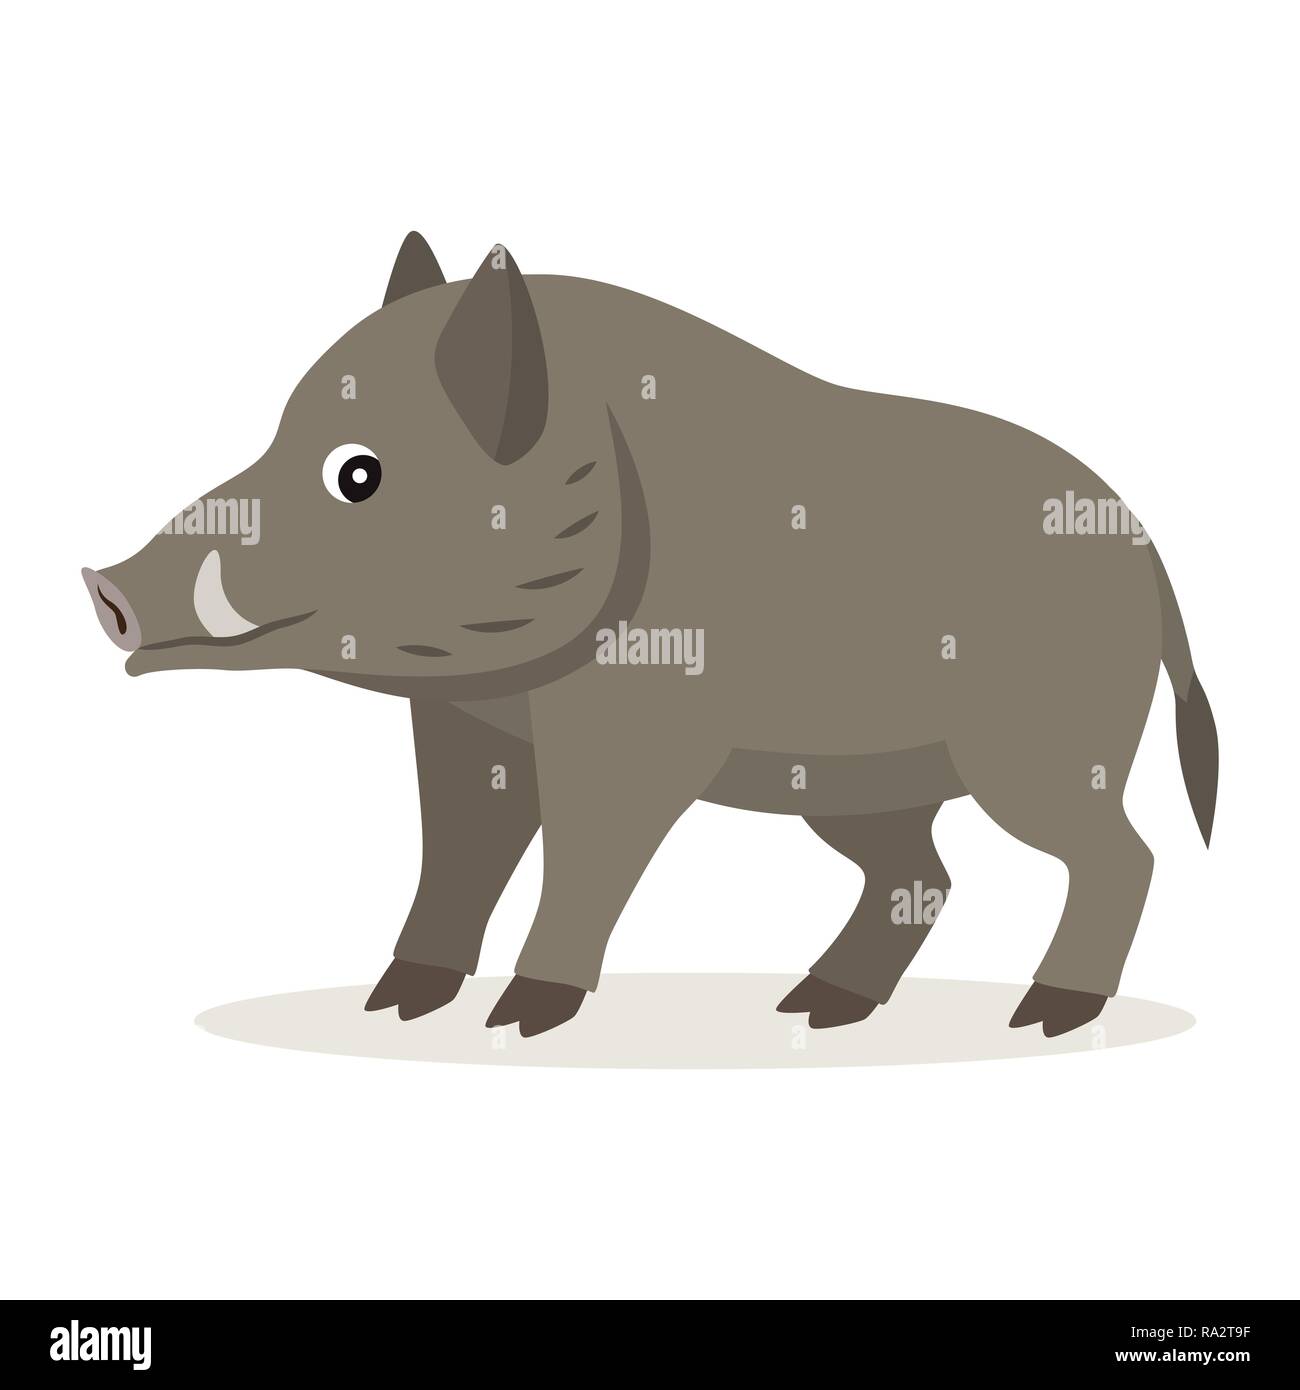 Cute forest animal, gray boar icon isolated on white background Stock Vector